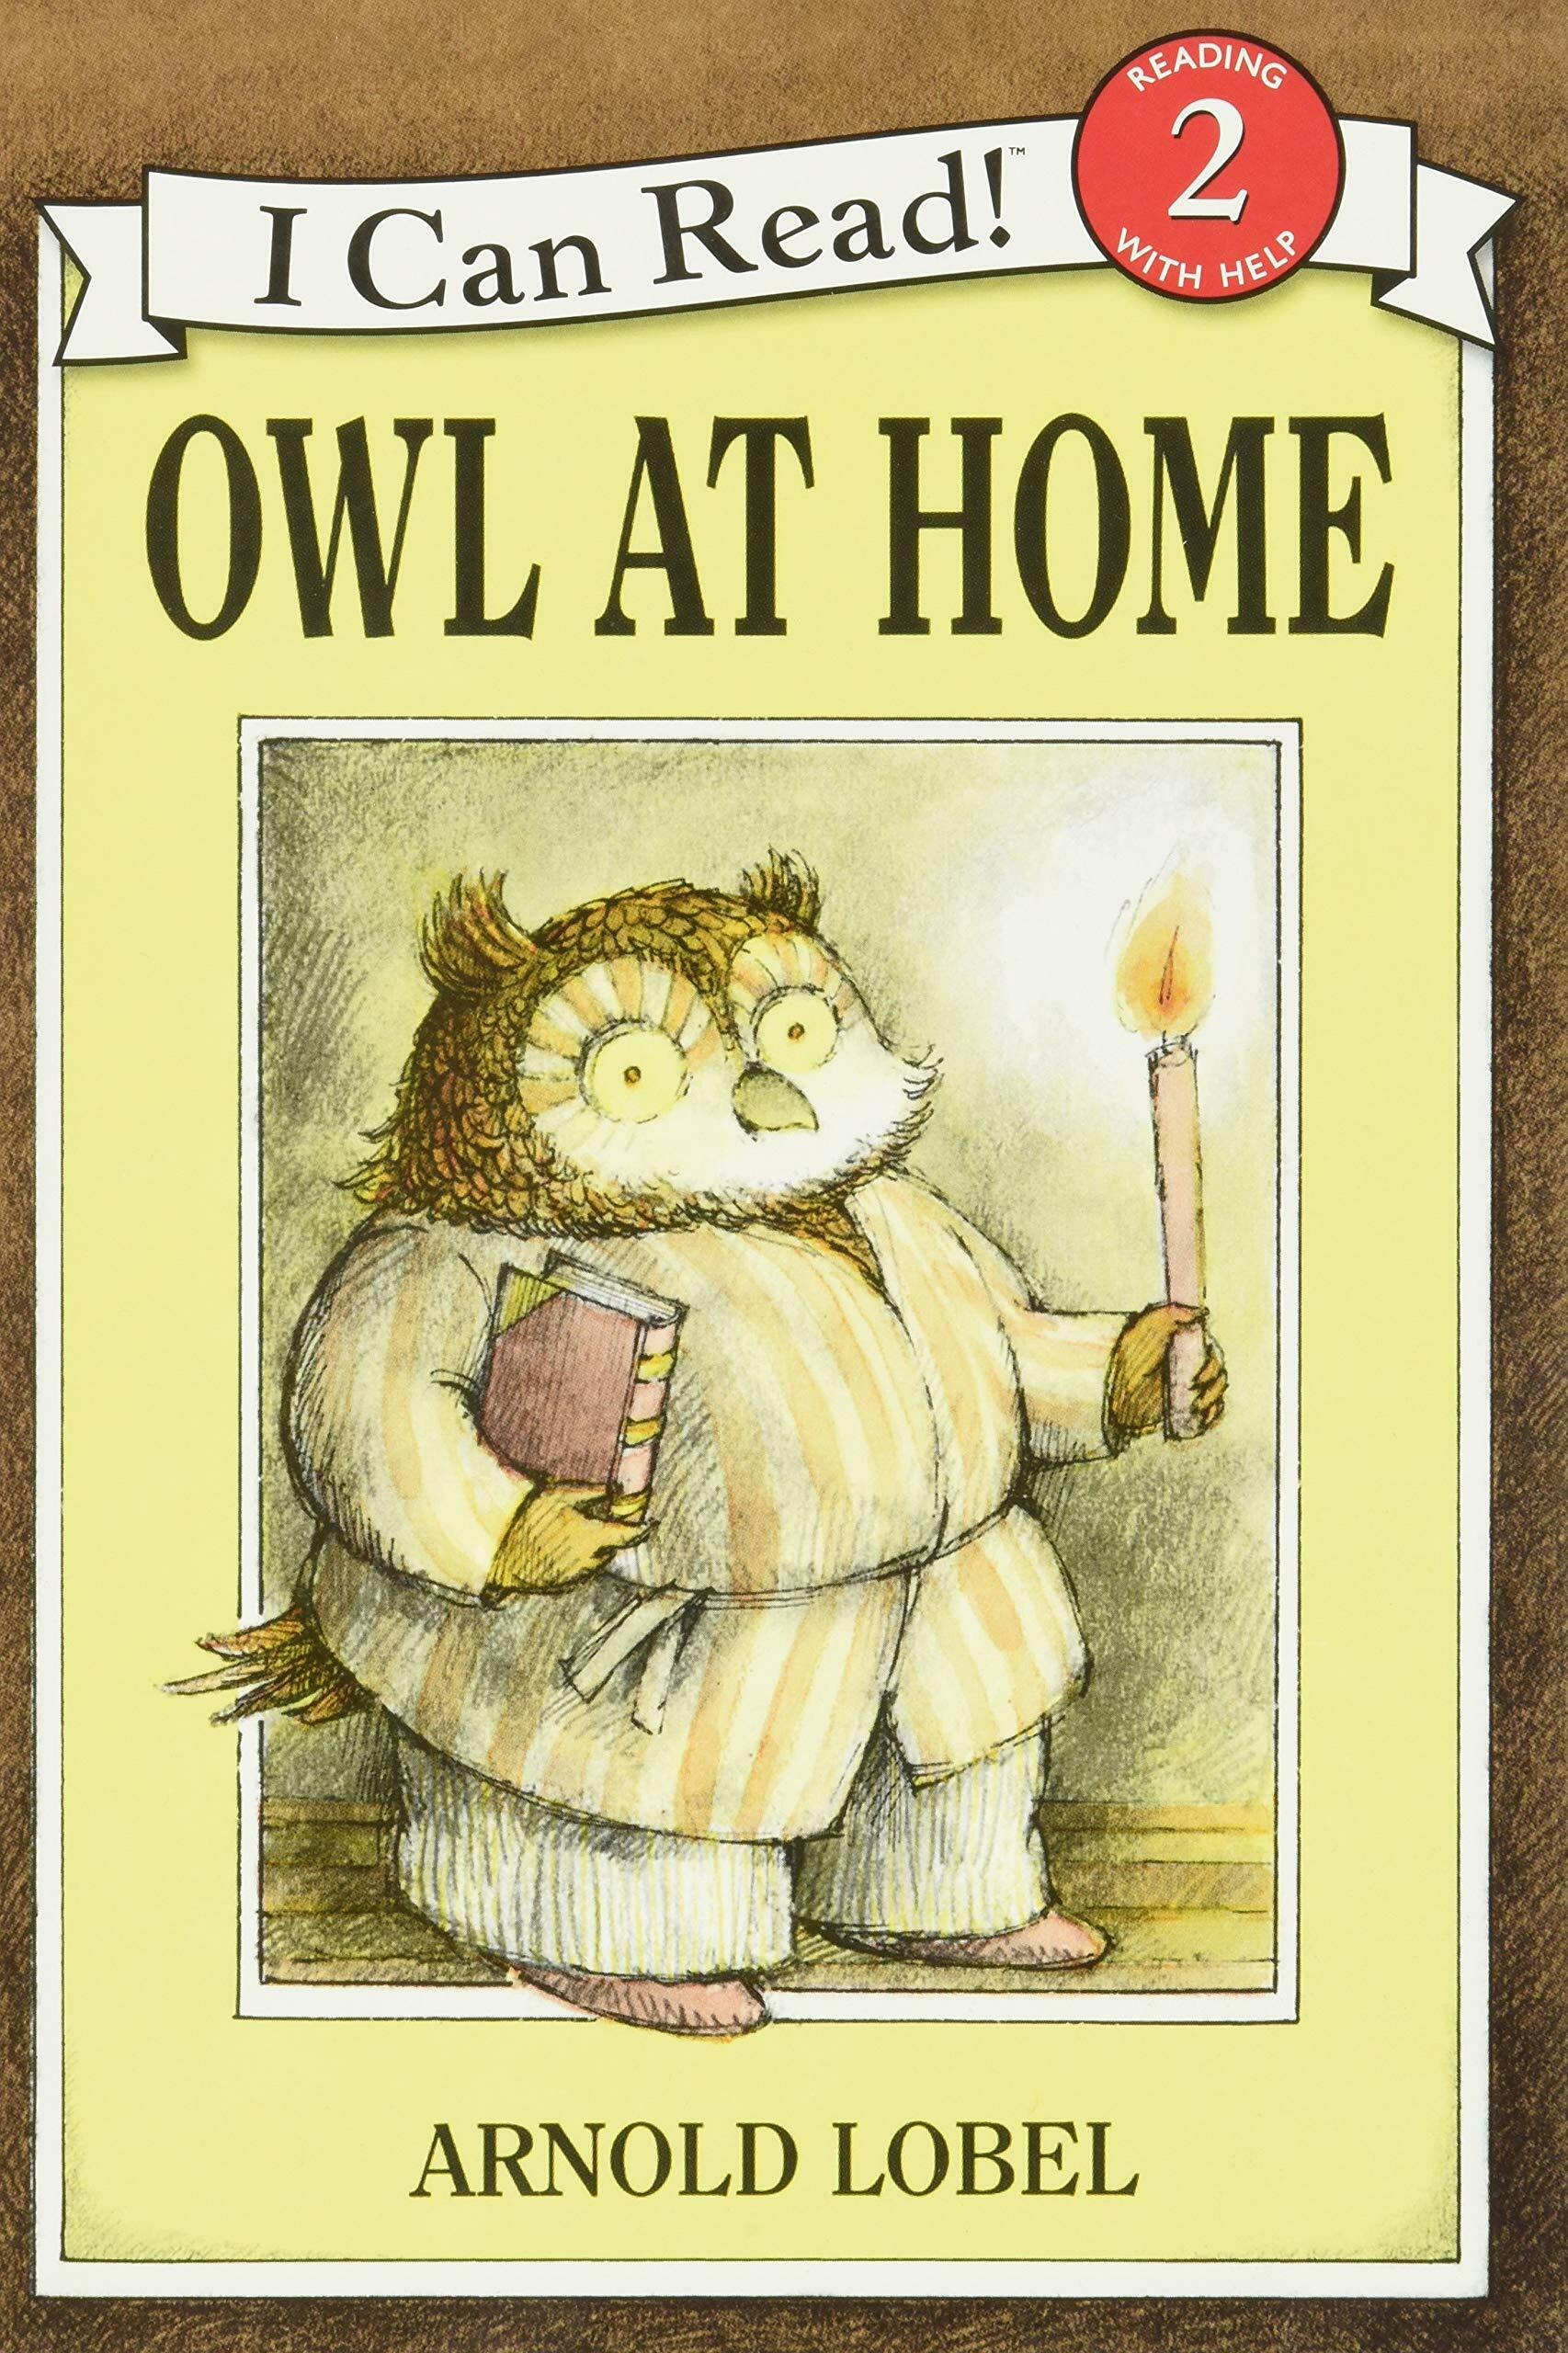 Owl at home